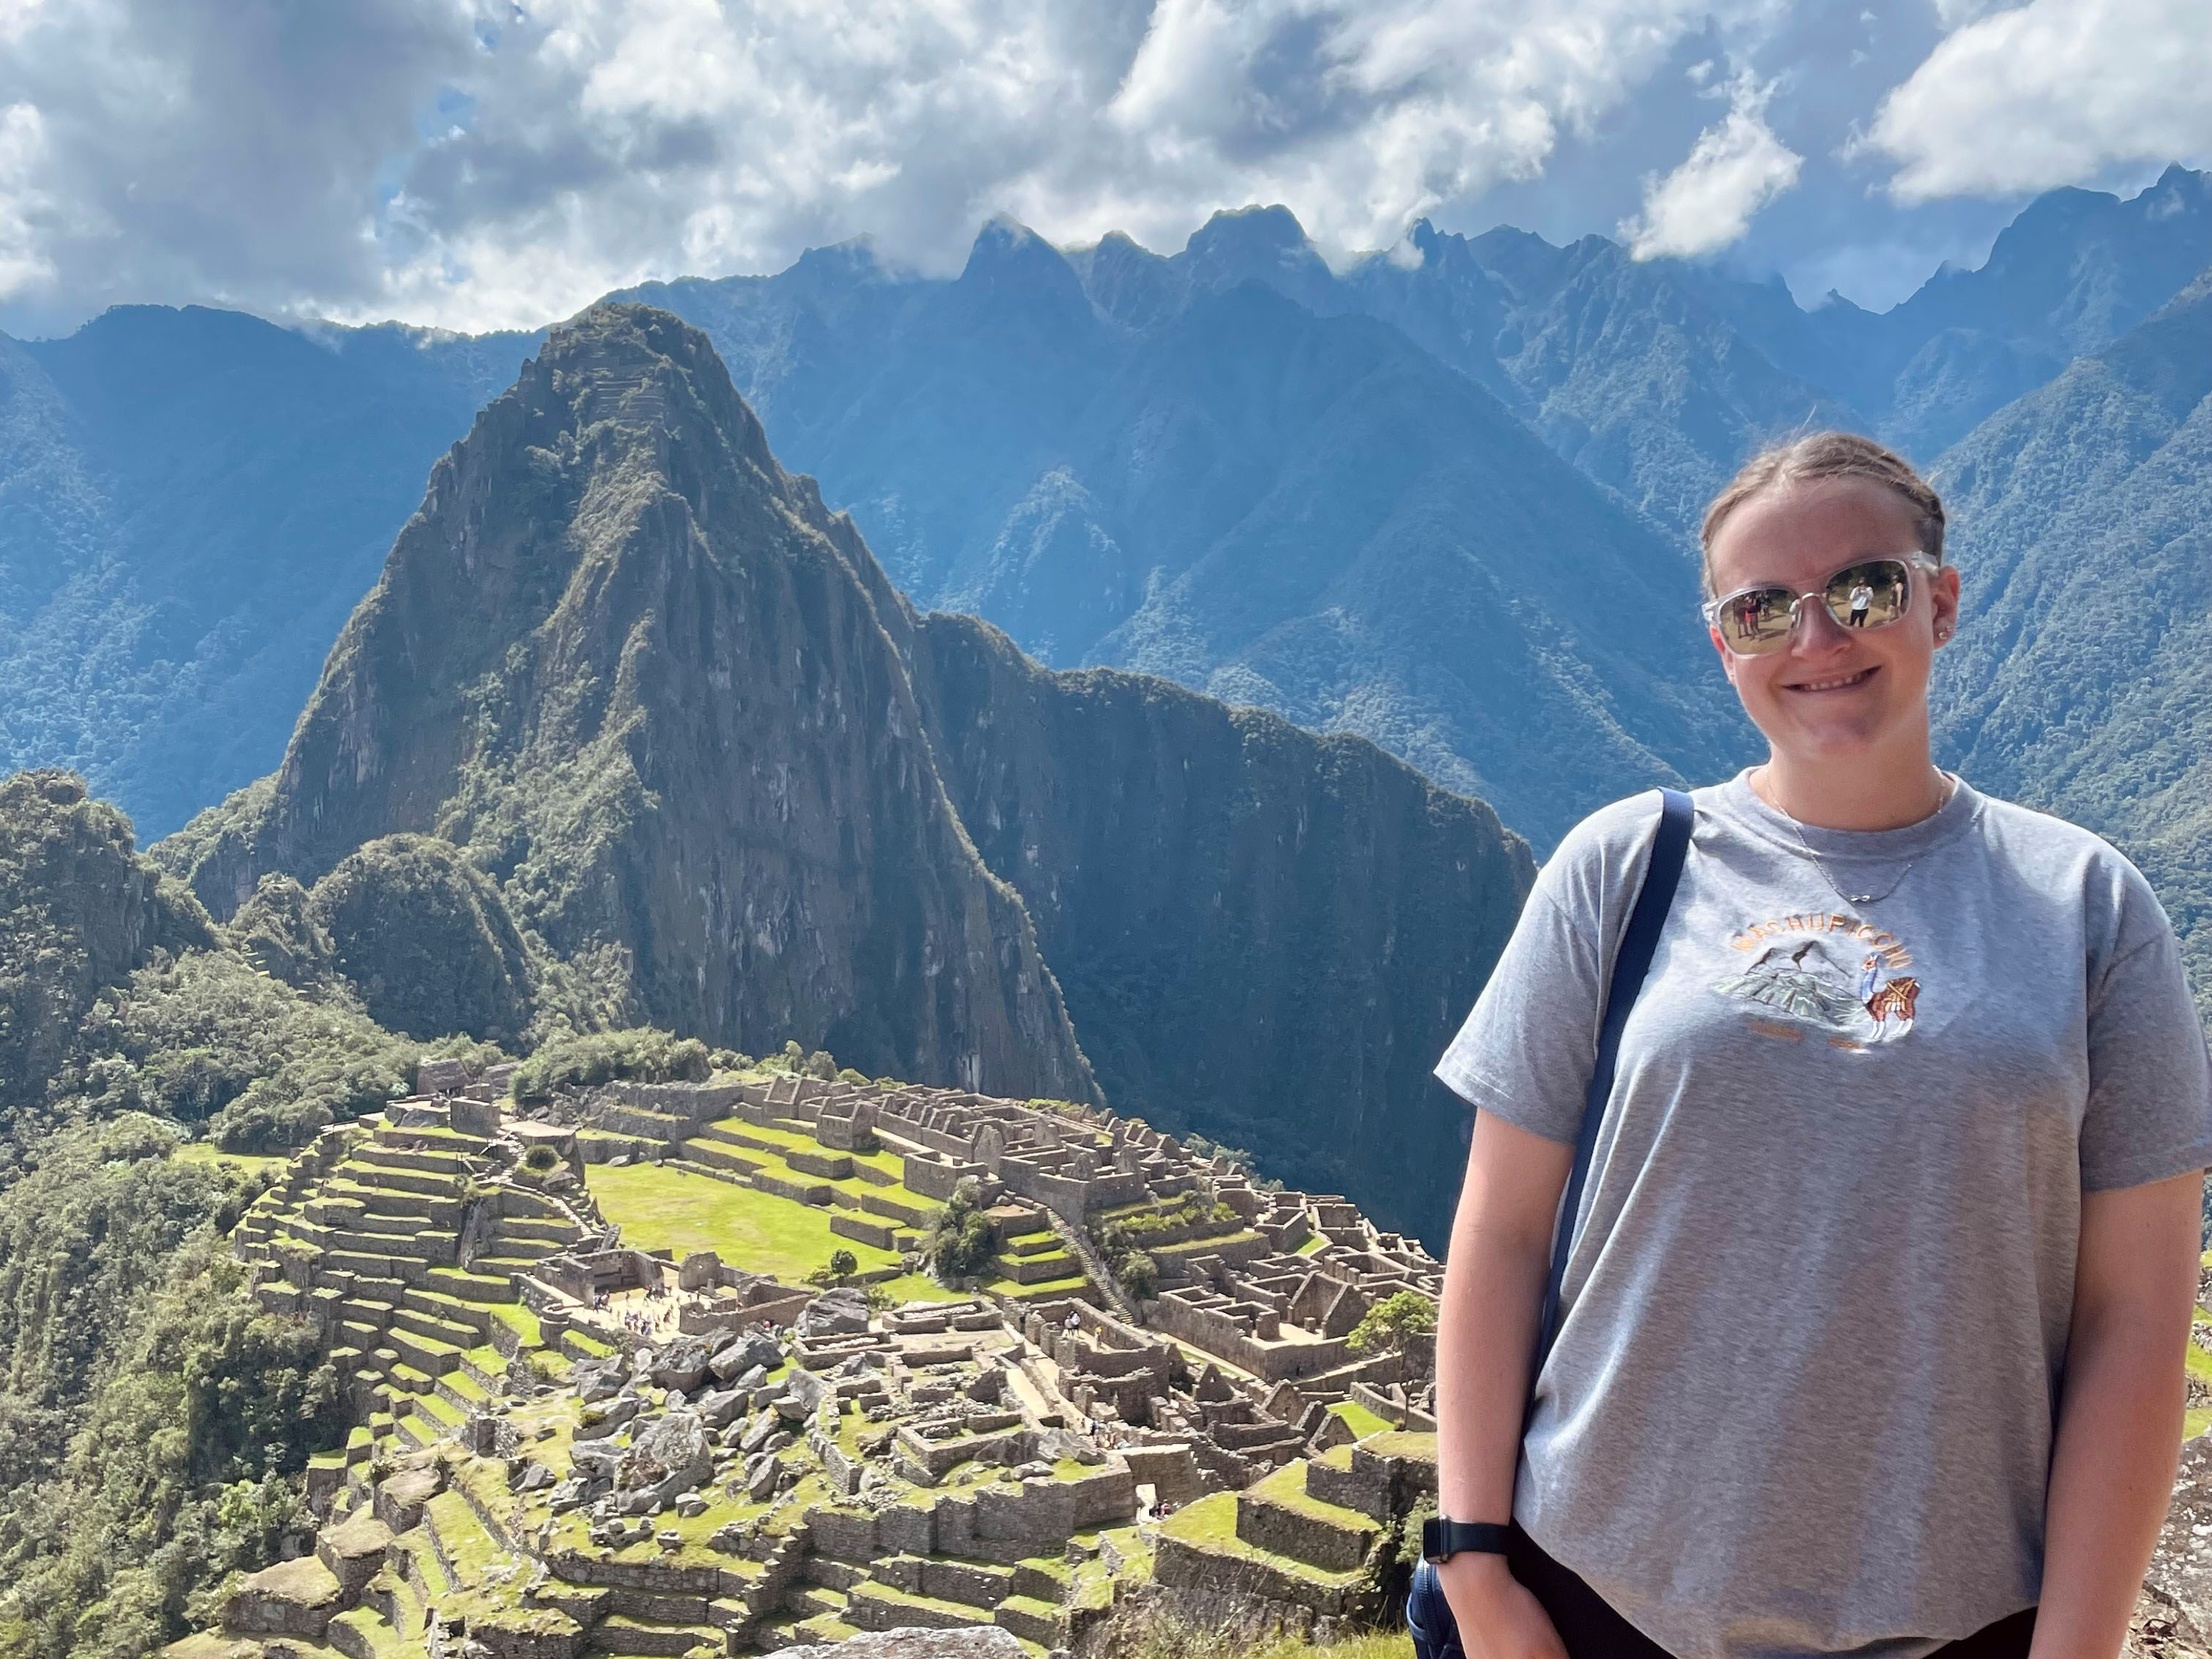 Honors student Katie Dunlop posing for a photo in Machu Picchu, Peru. Katie is wearing a gray t-shirt, black leggings, and black refelective sunglasses. Machu Picchu is featured prominently behind her.